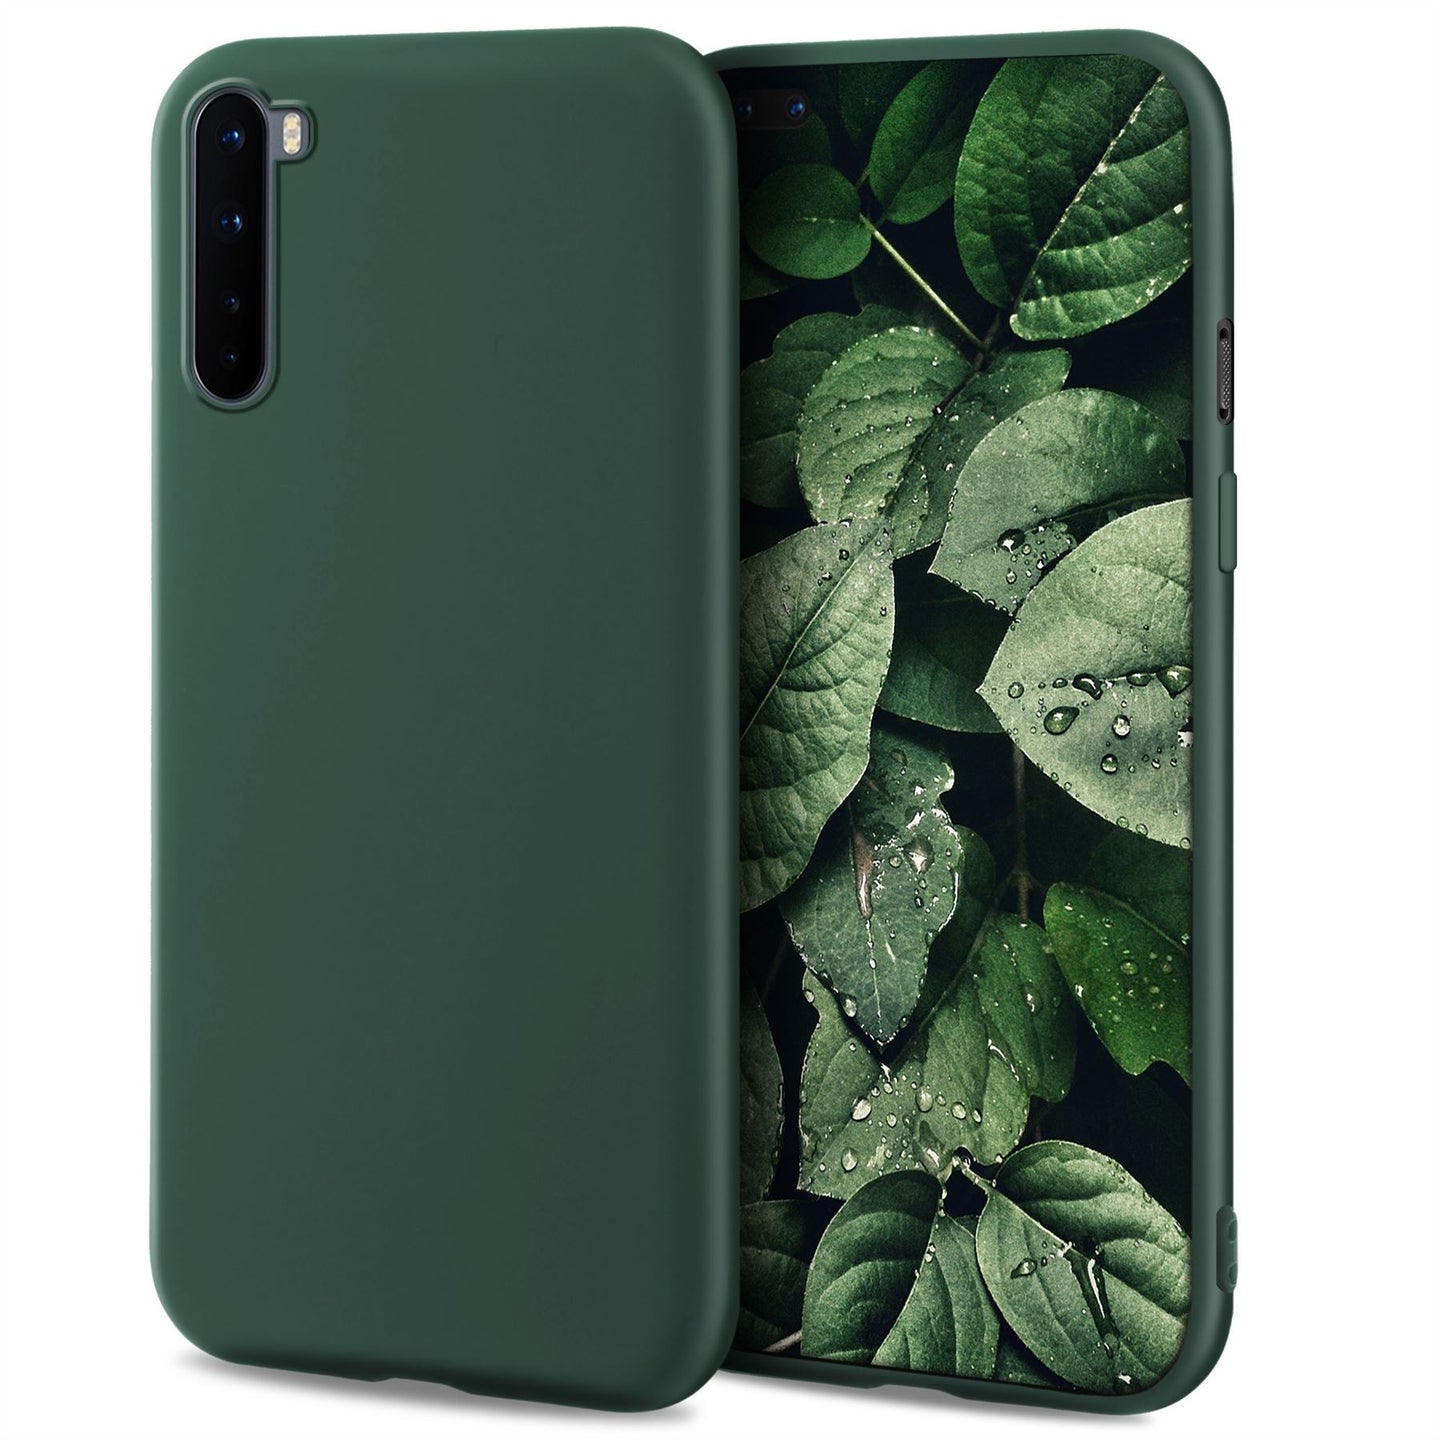 Moozy Minimalist Series Silicone Case for OnePlus Nord, Midnight Green - Matte Finish Slim Soft TPU Cover